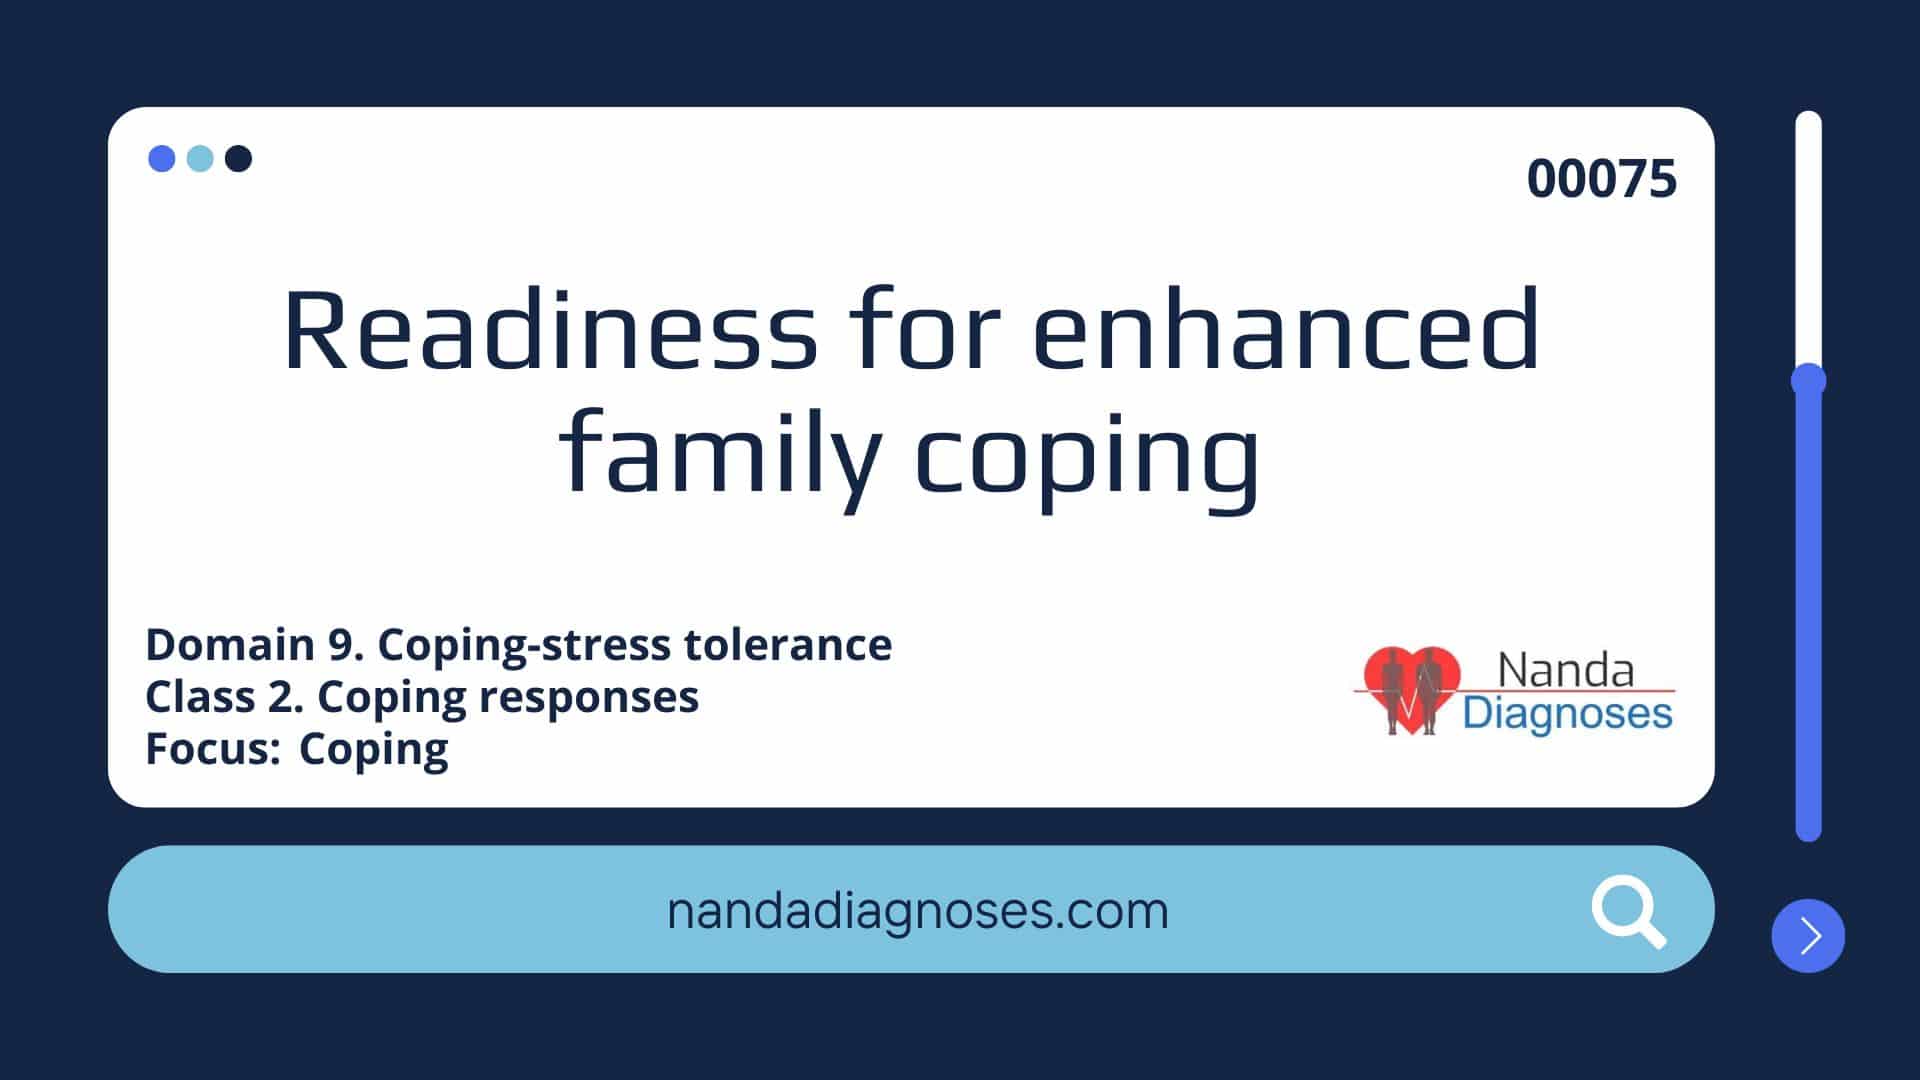 Readiness for enhanced family coping